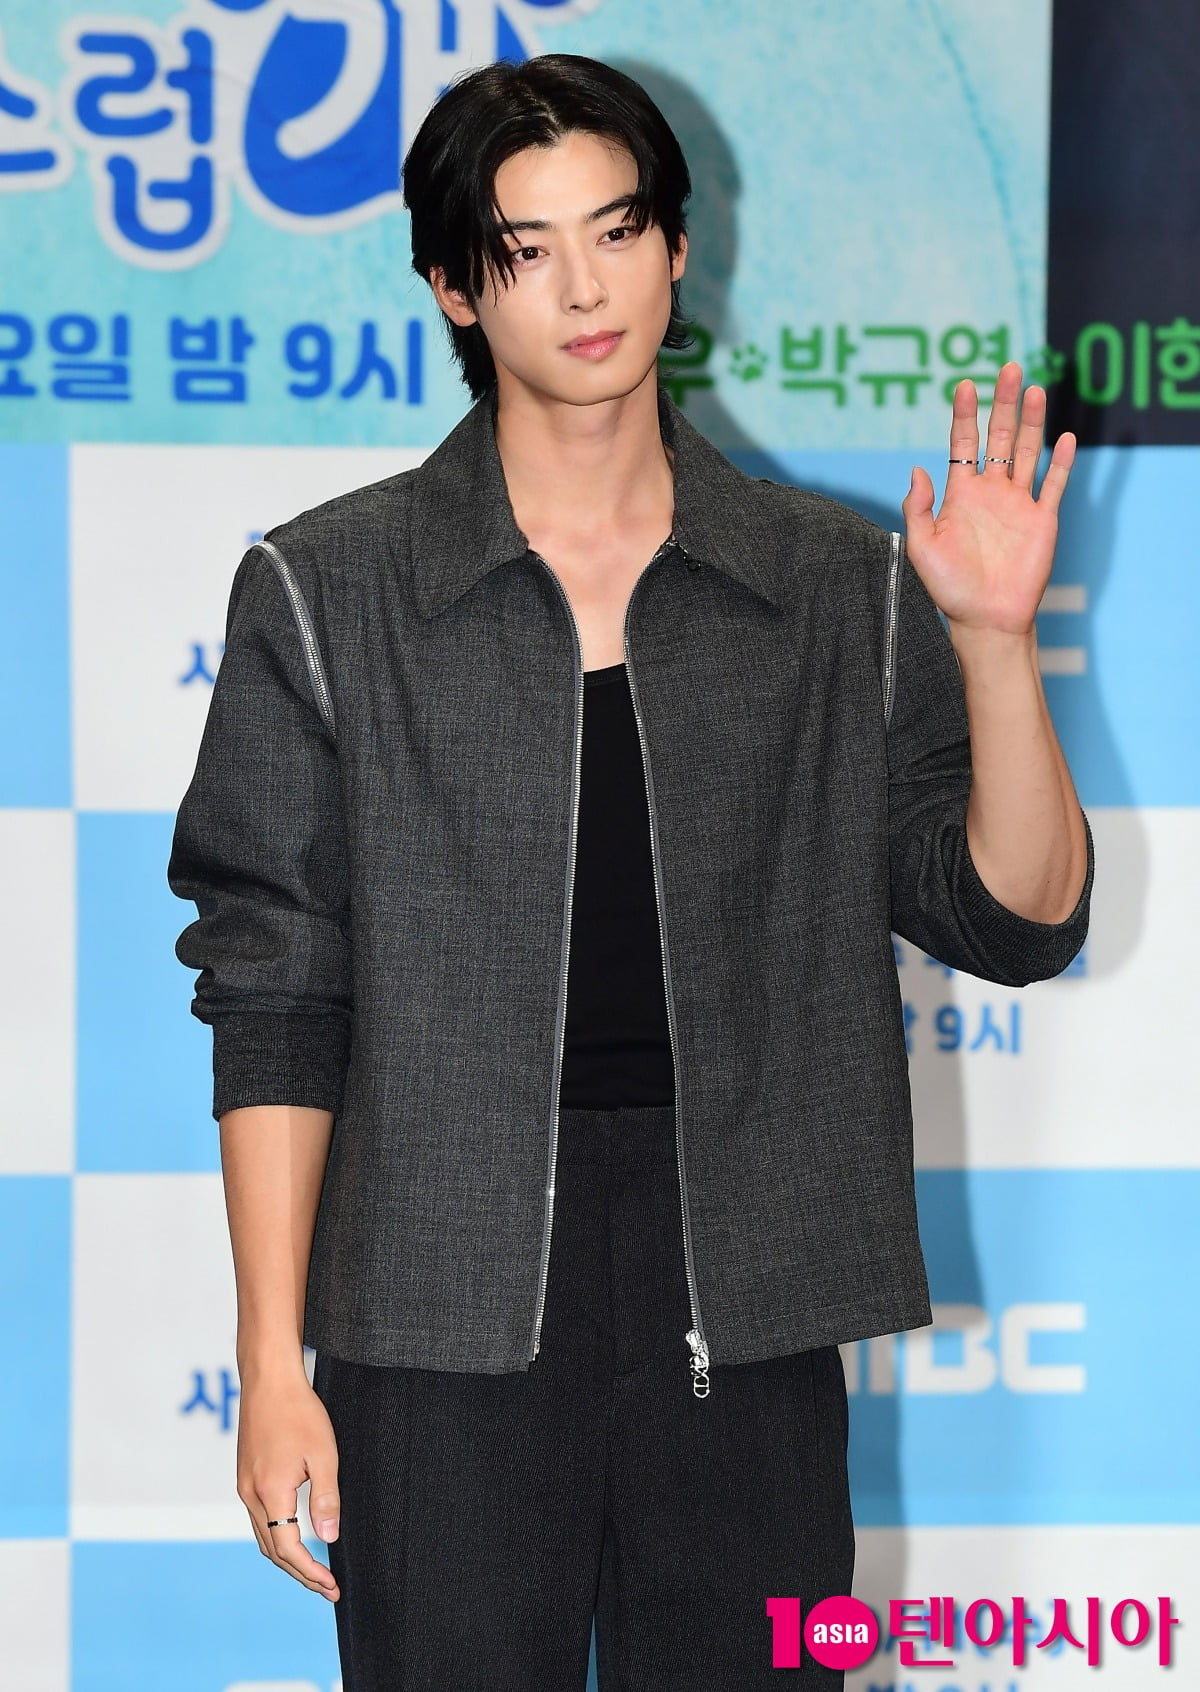 Cha Eun-woo "I am more grateful for the interest in visuals than a burden"